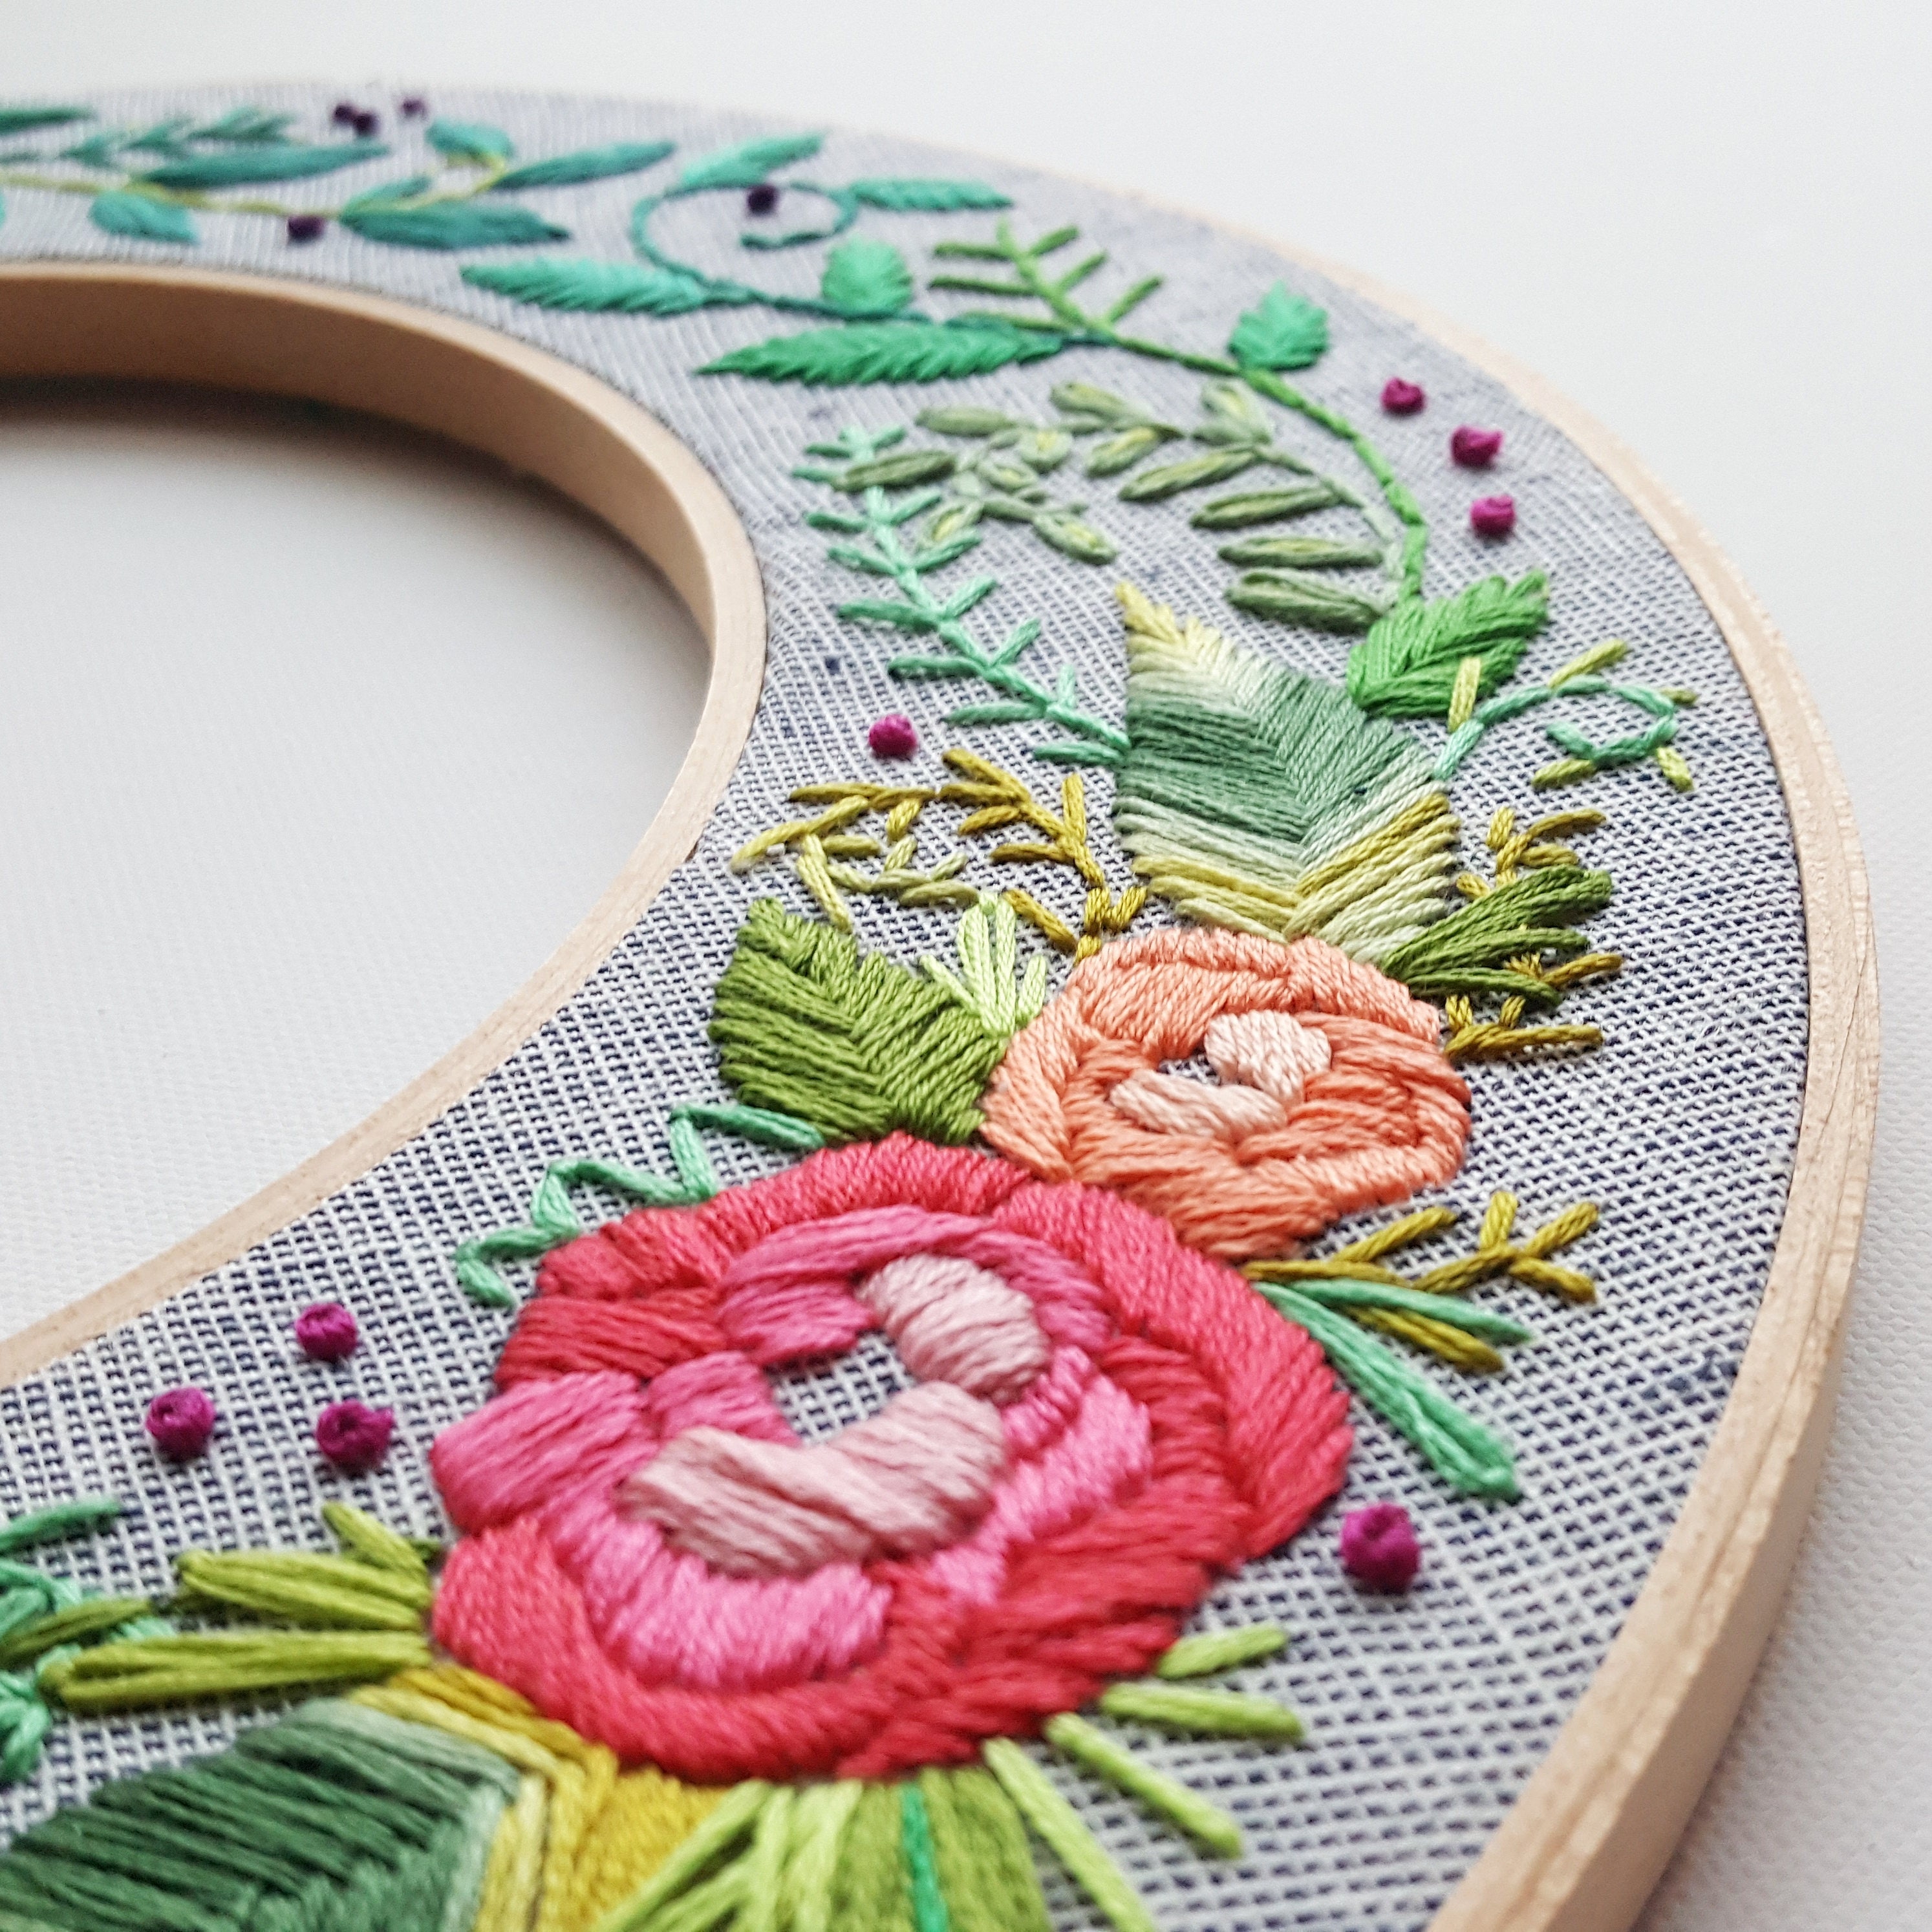 Beginner Hand Embroidery Kit With Online Class, Rainbow Spiral Needlework  Pattern, Easy Embroidery Video Tutorial, Basic Stitch Lesson 